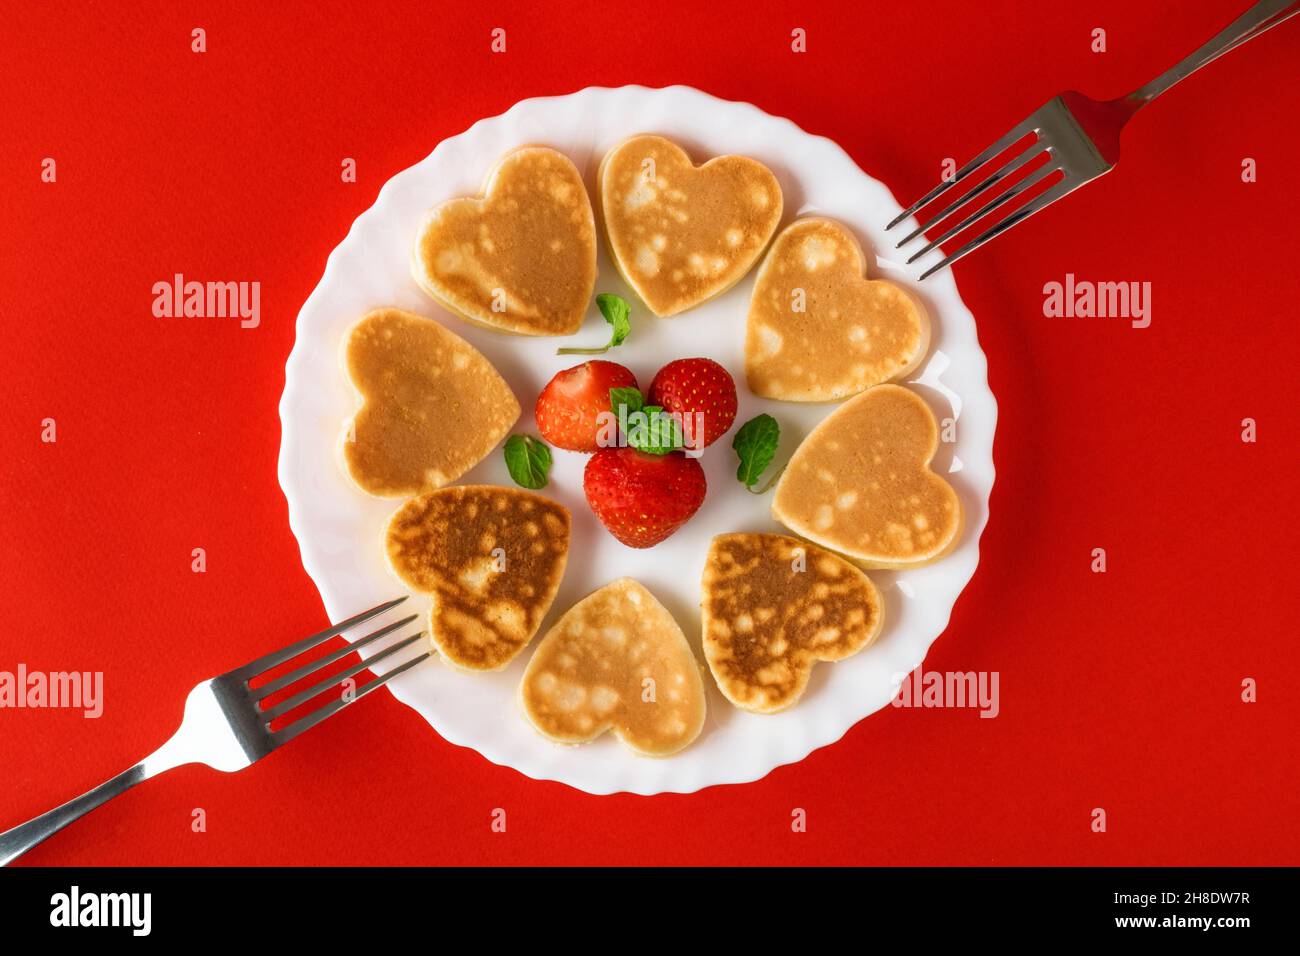 Creative breakfast for Valentine's Day. Heart shaped pancakes with strawberries on a plate with forks, on a red background. Valentine's day background Stock Photo